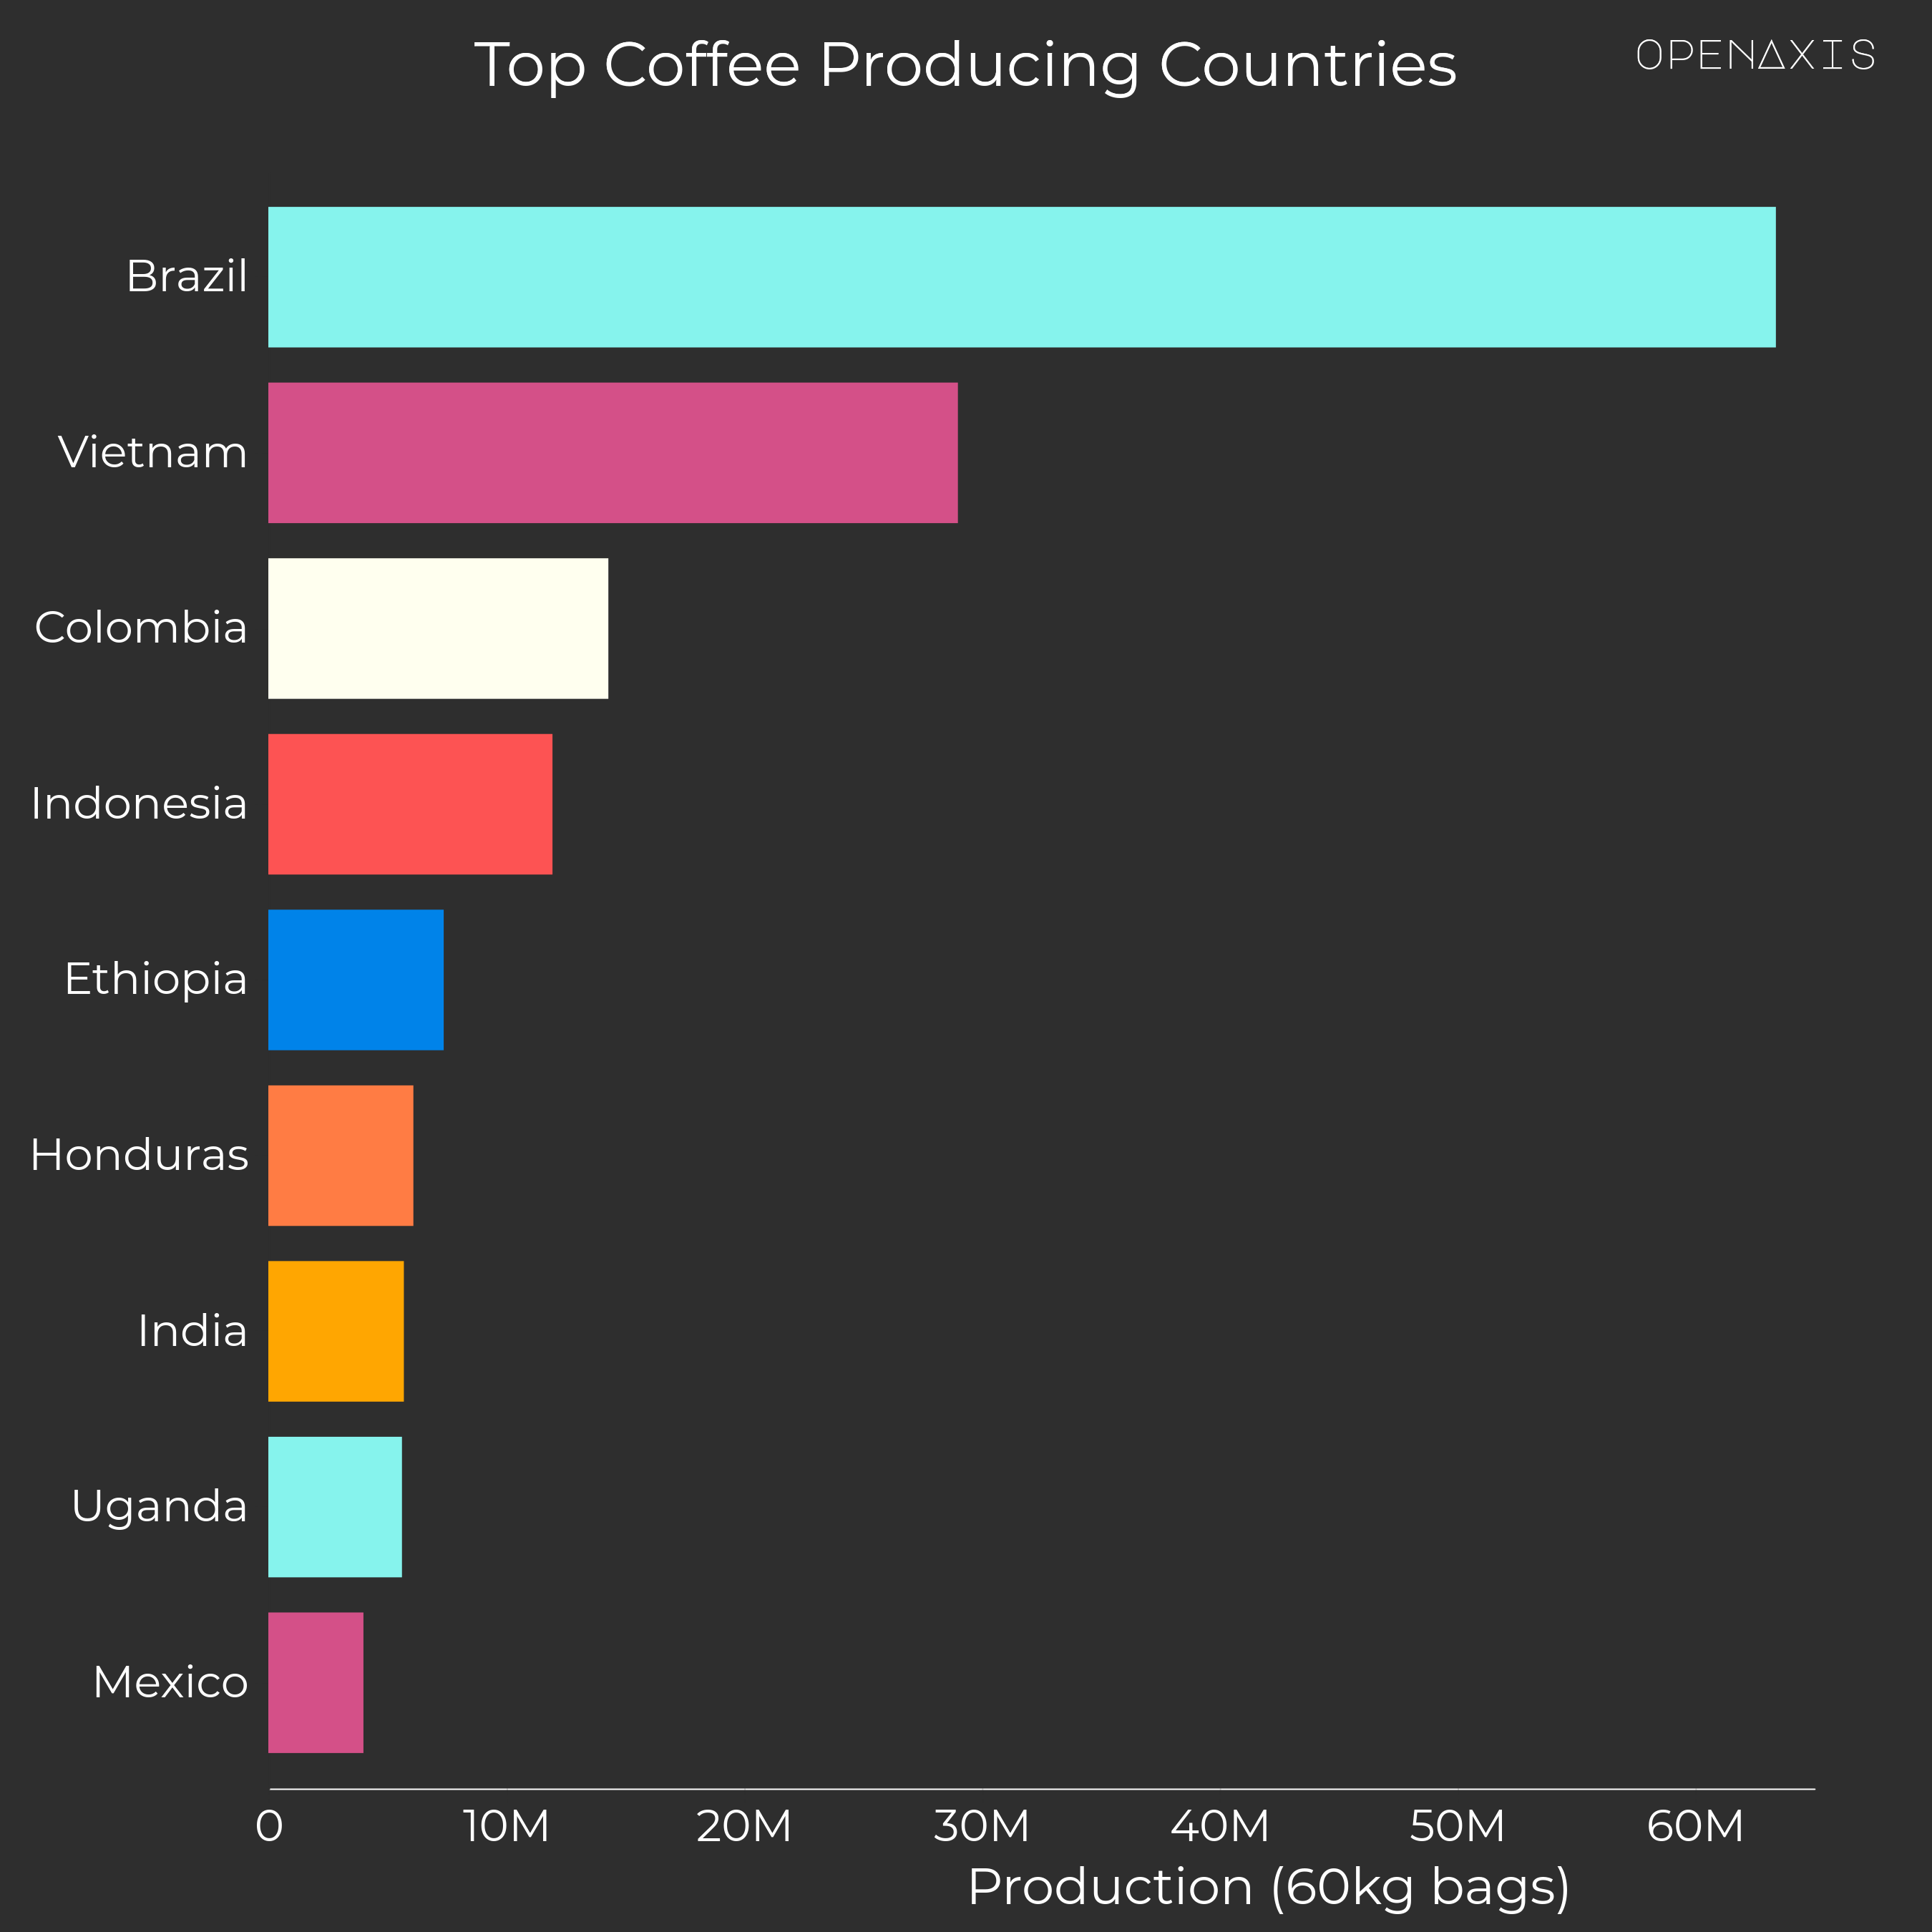 "Top Coffee Producing Countries"